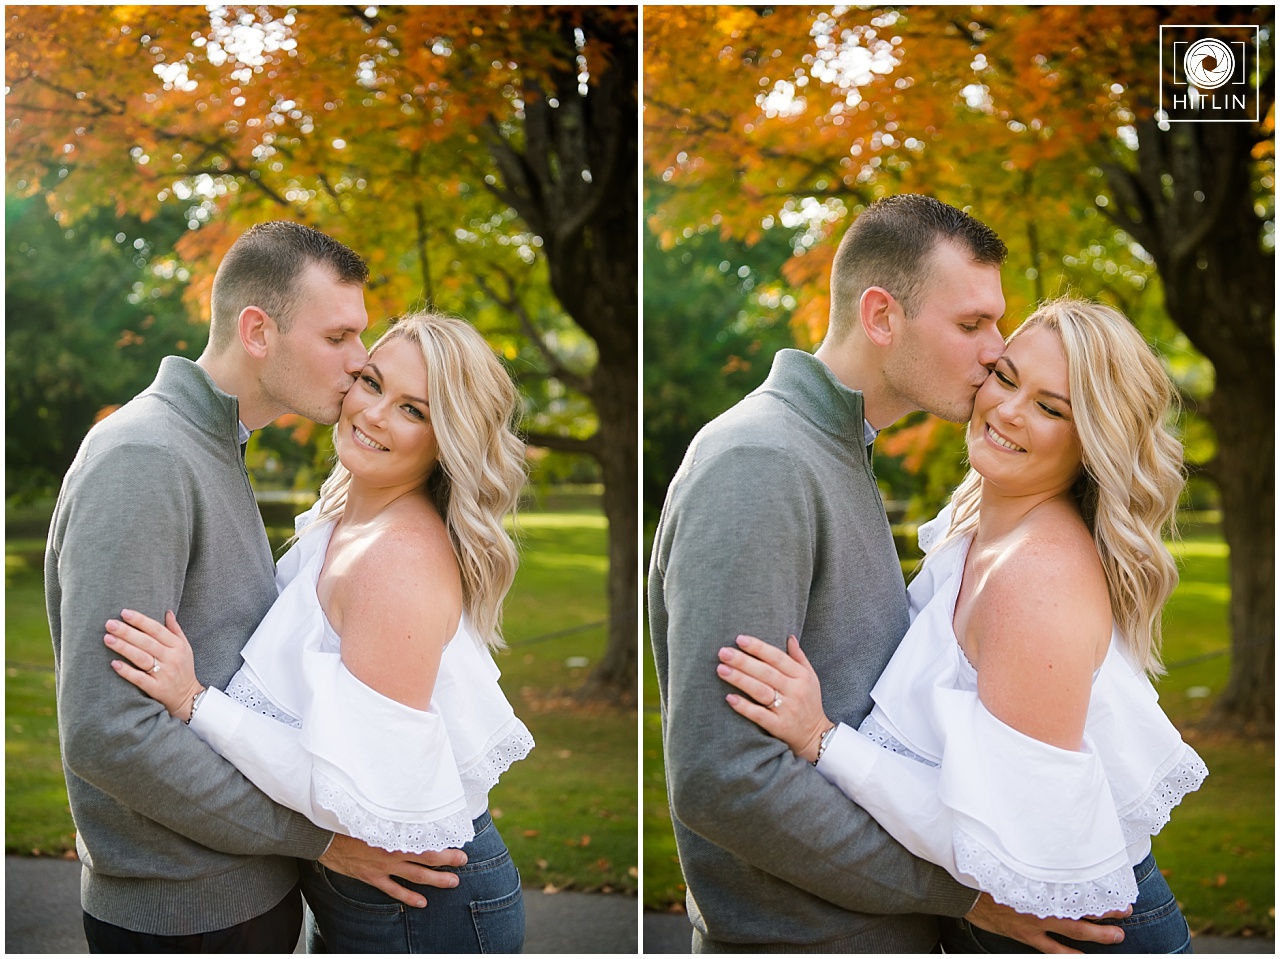 Chelsea & Chas' Engagement Session